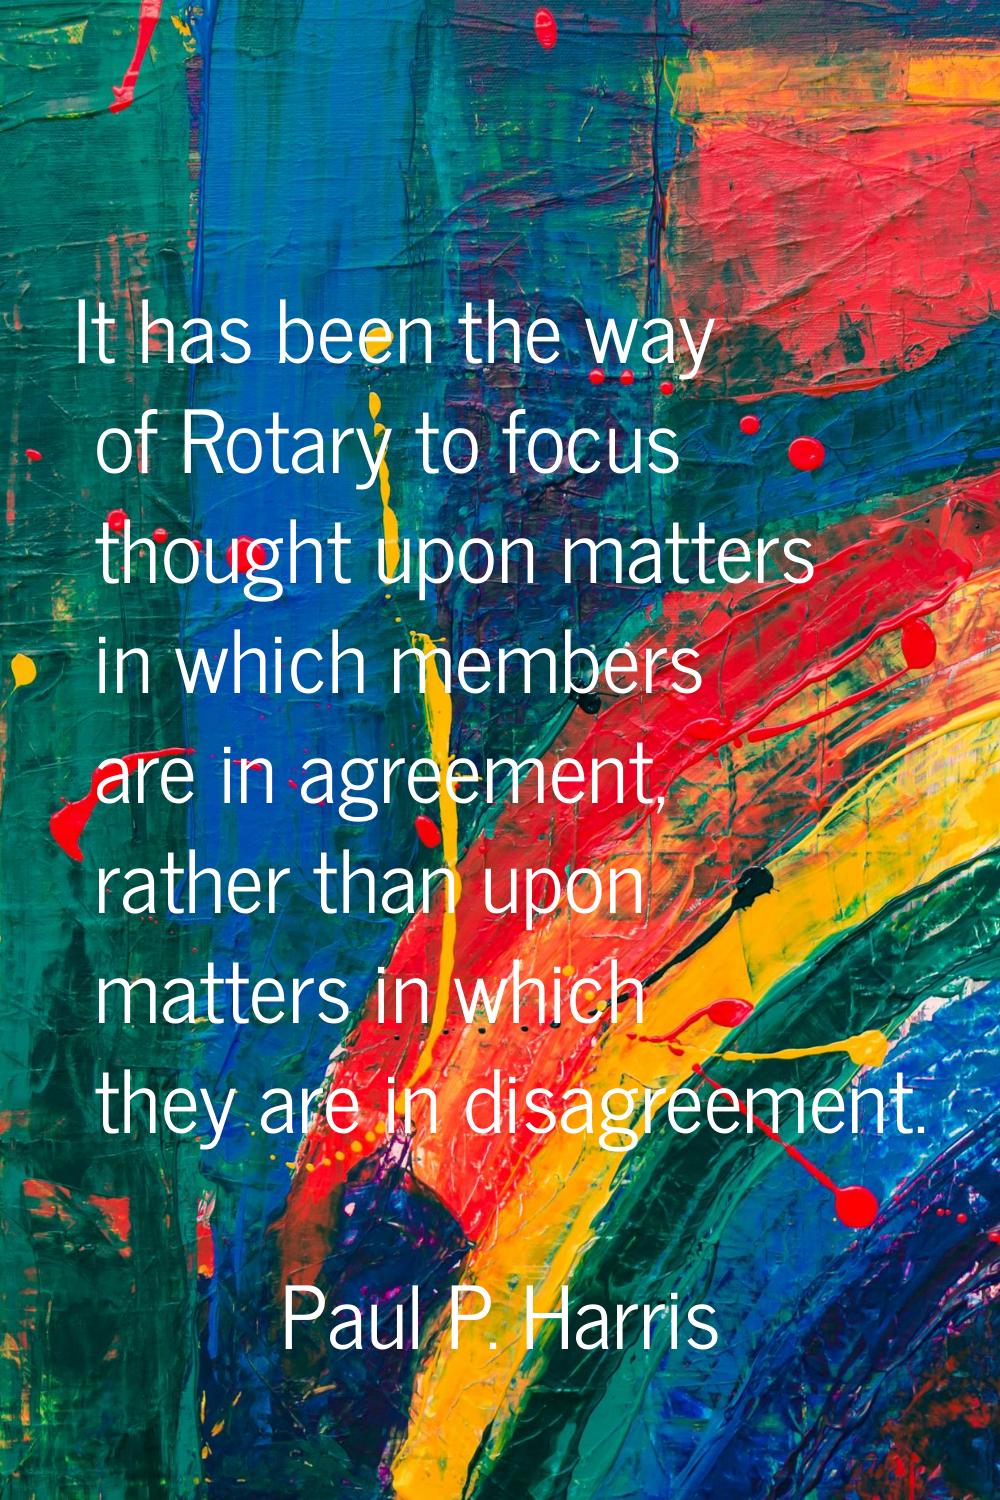 It has been the way of Rotary to focus thought upon matters in which members are in agreement, rath